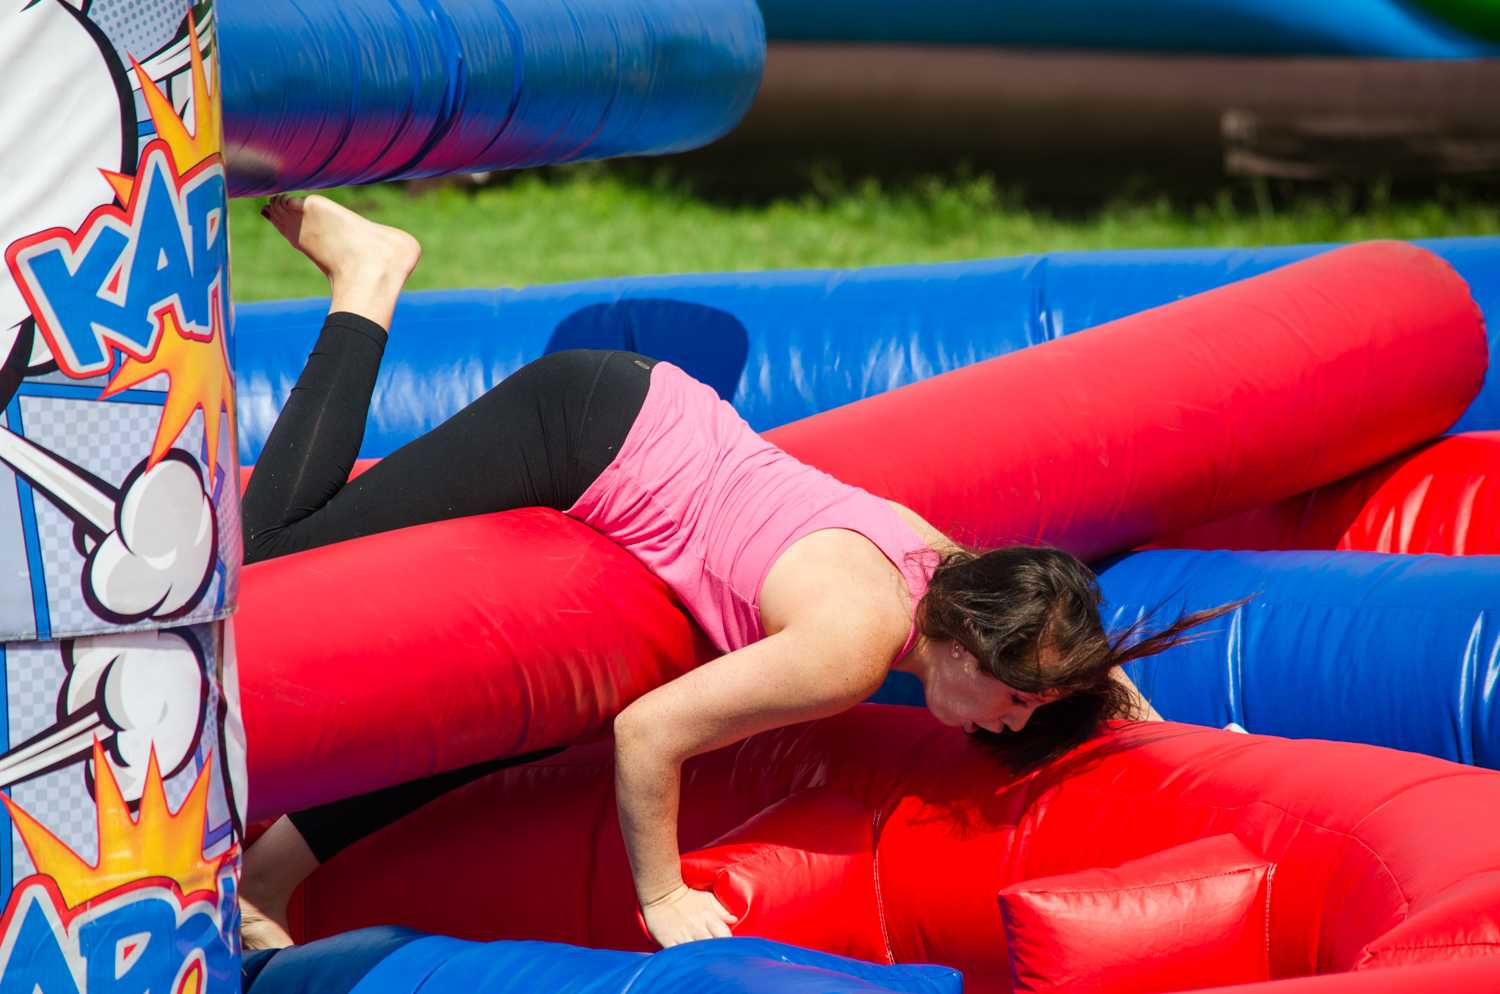 The swinging arms on the obstacle course are harder to avoid than they seem. 